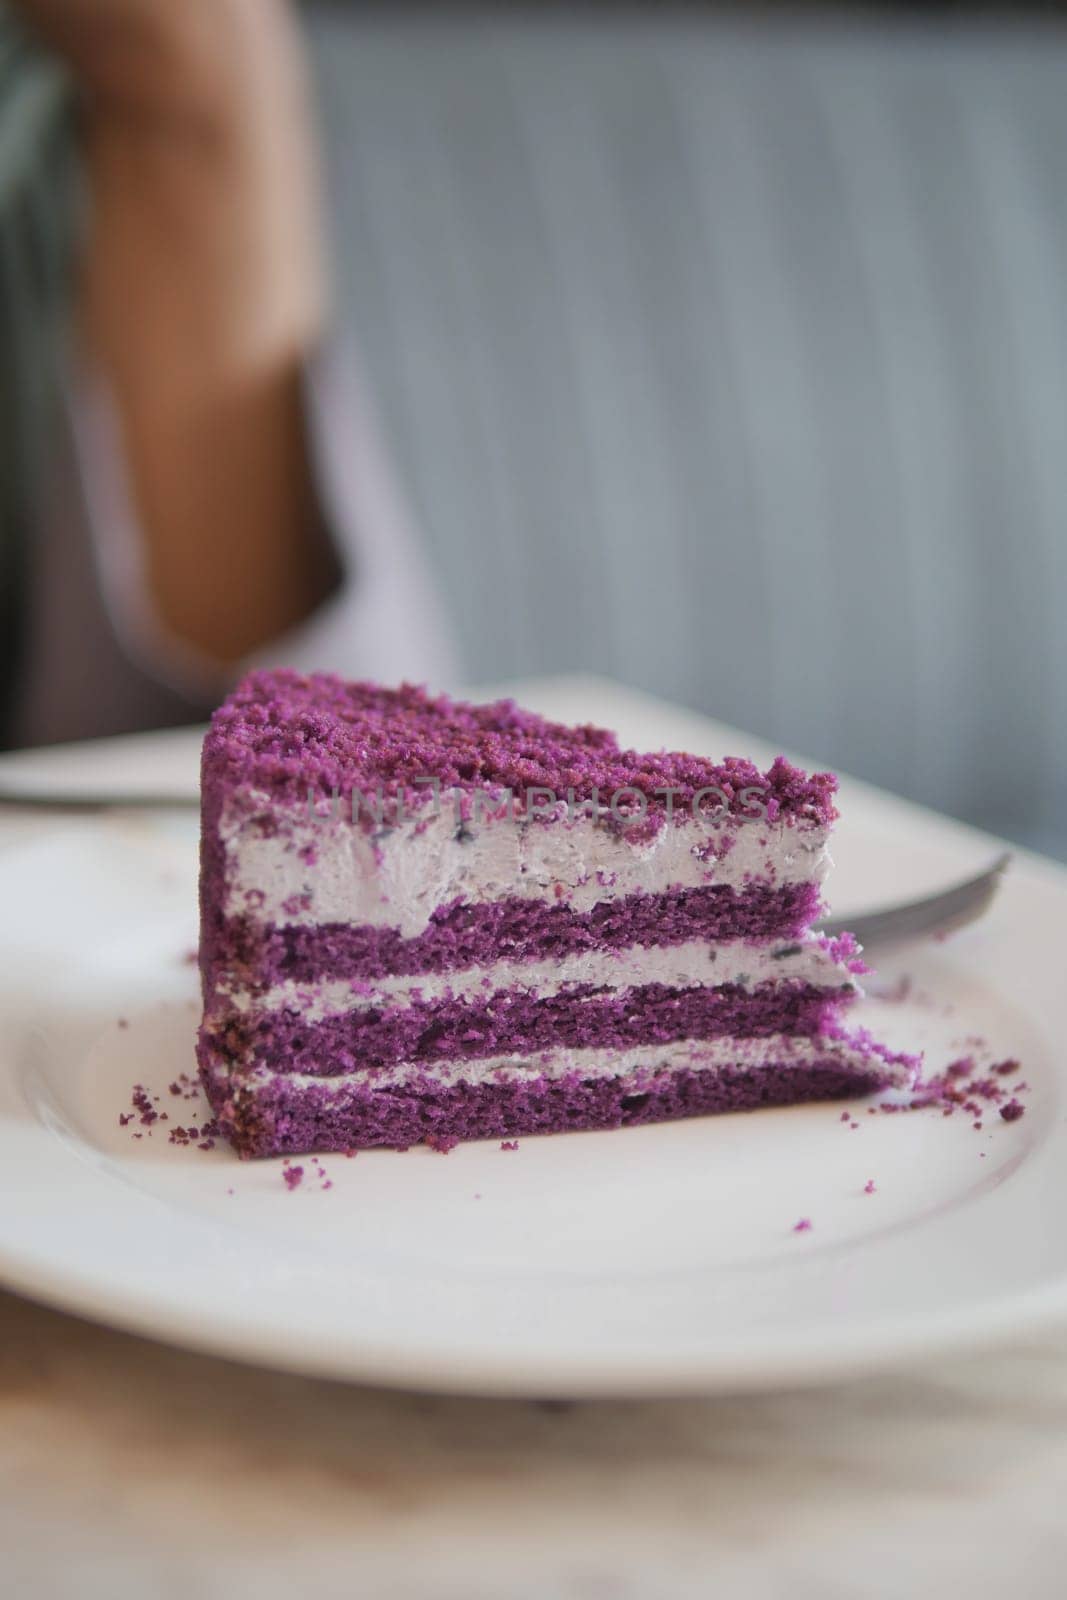 cutting A piece of purple velvet cake with cream by towfiq007